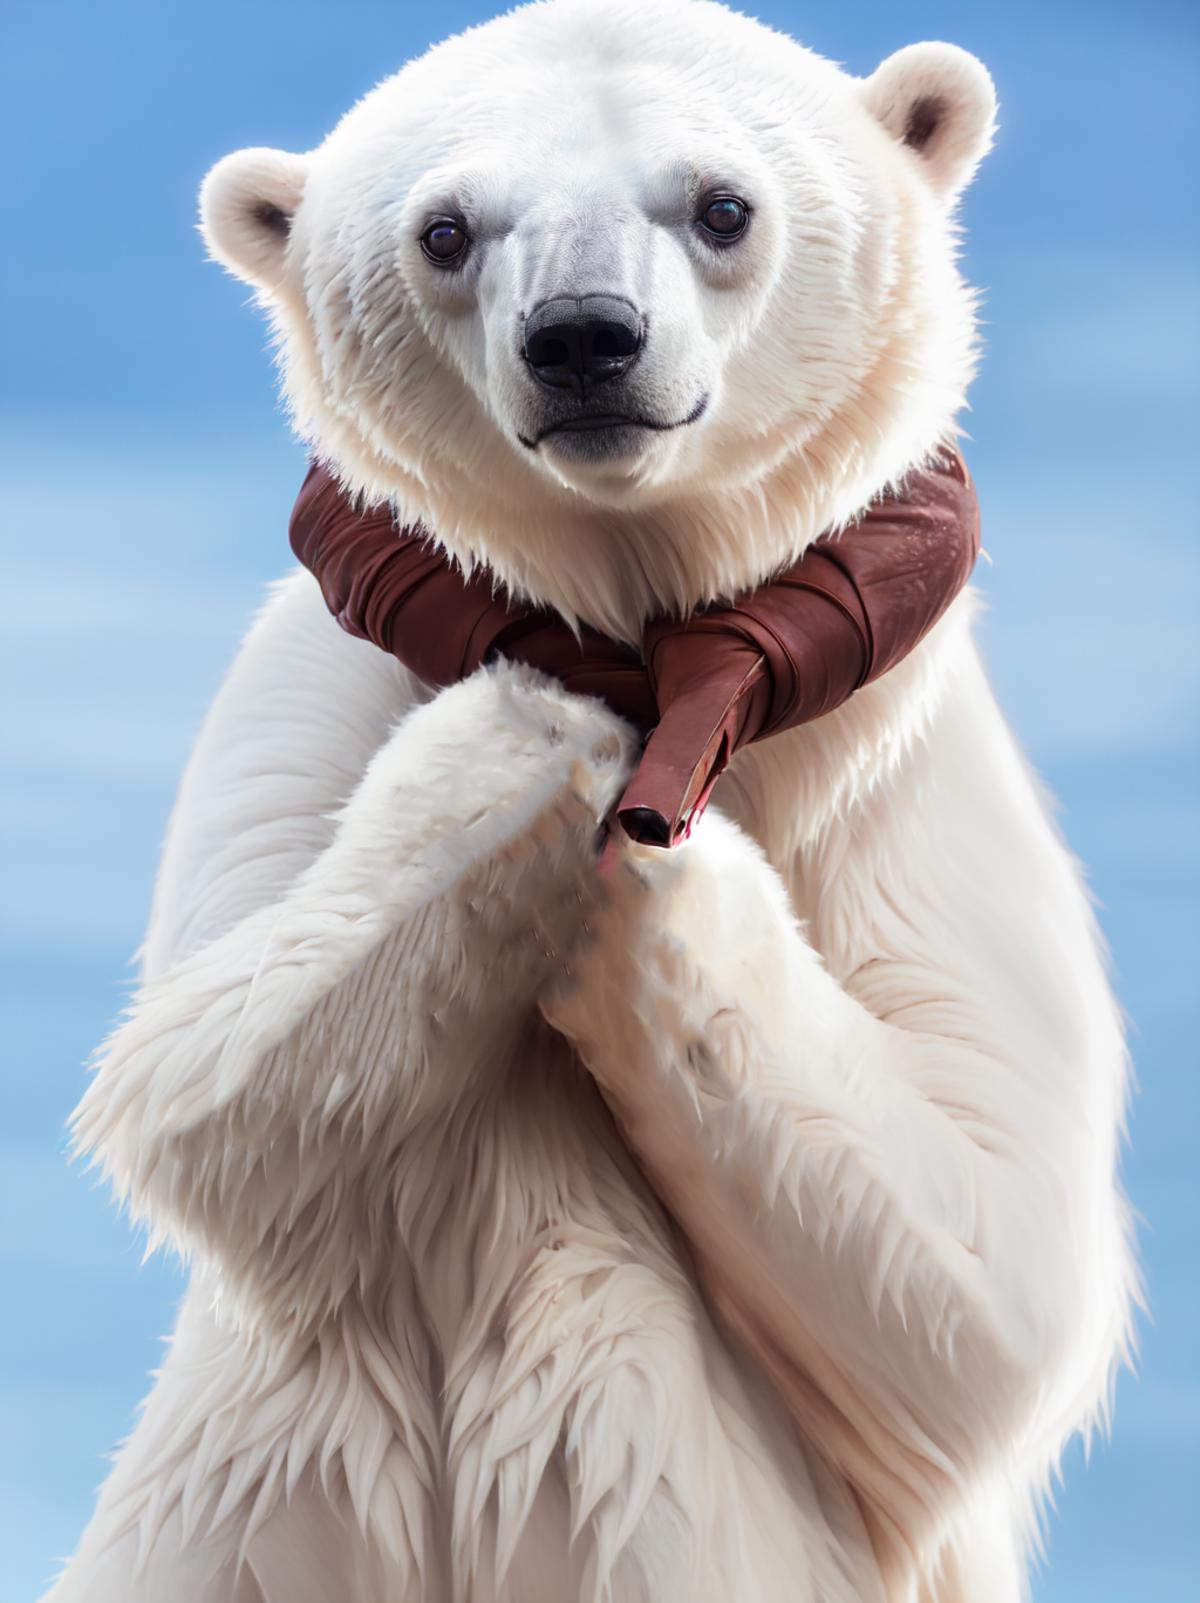 A white polar bear wearing a leather collar and a red tie.